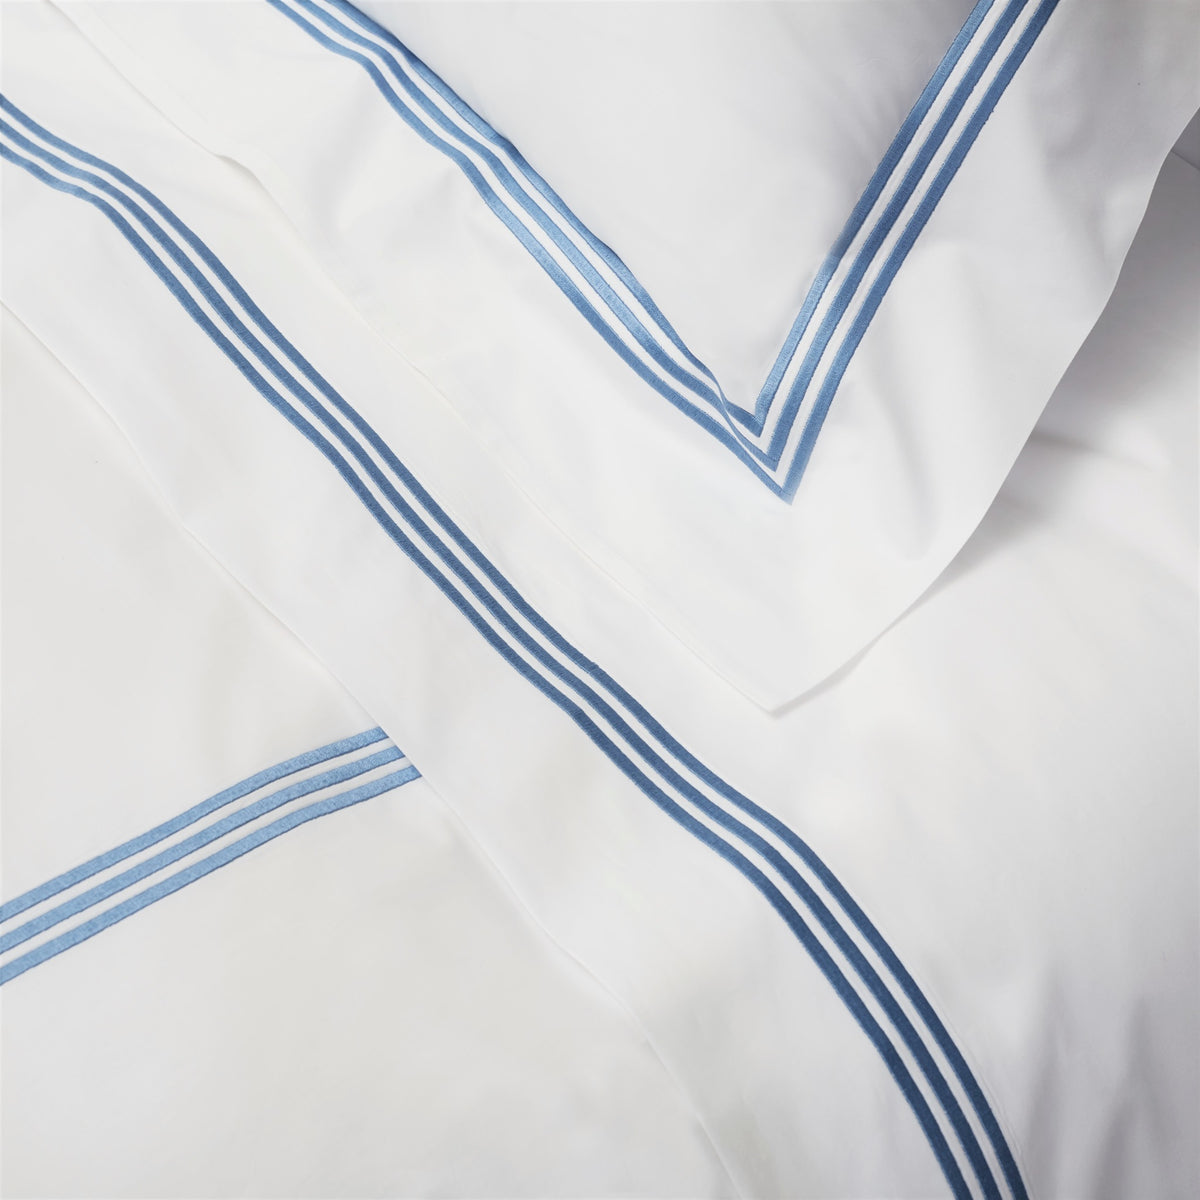 Detail Image of Signoria Platinum Percale Bedding in White/Airforce Blue Color